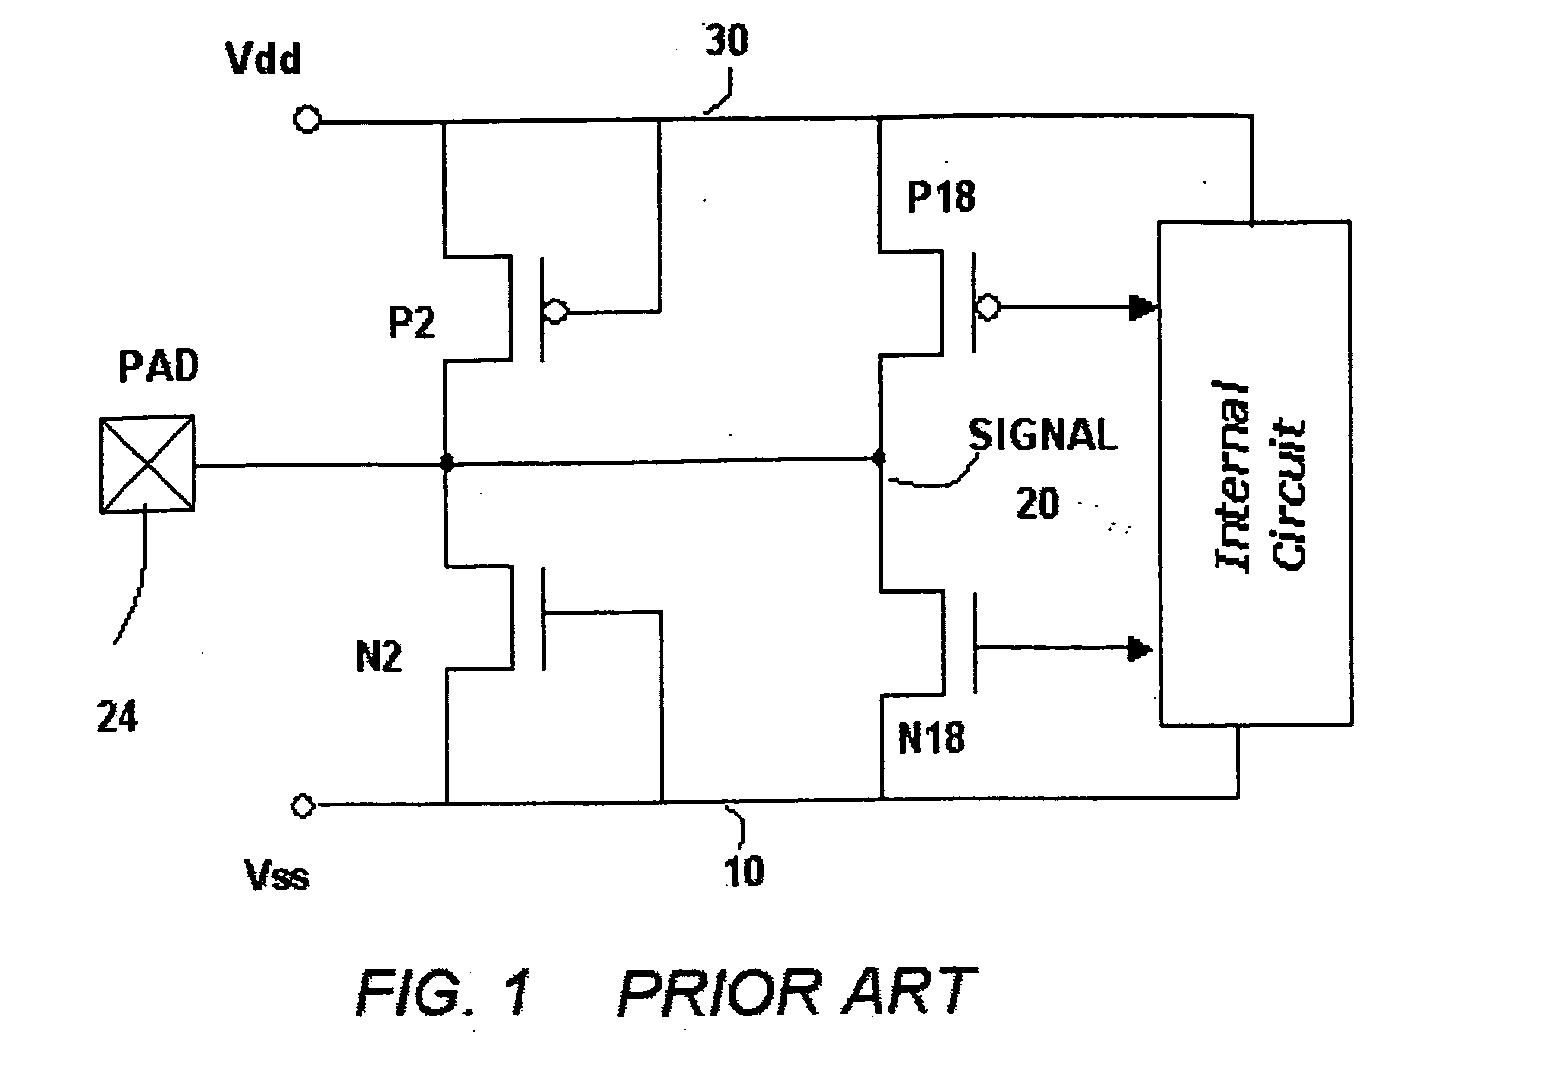 Electrostatic discharge protection device and network with high voltage tolerance